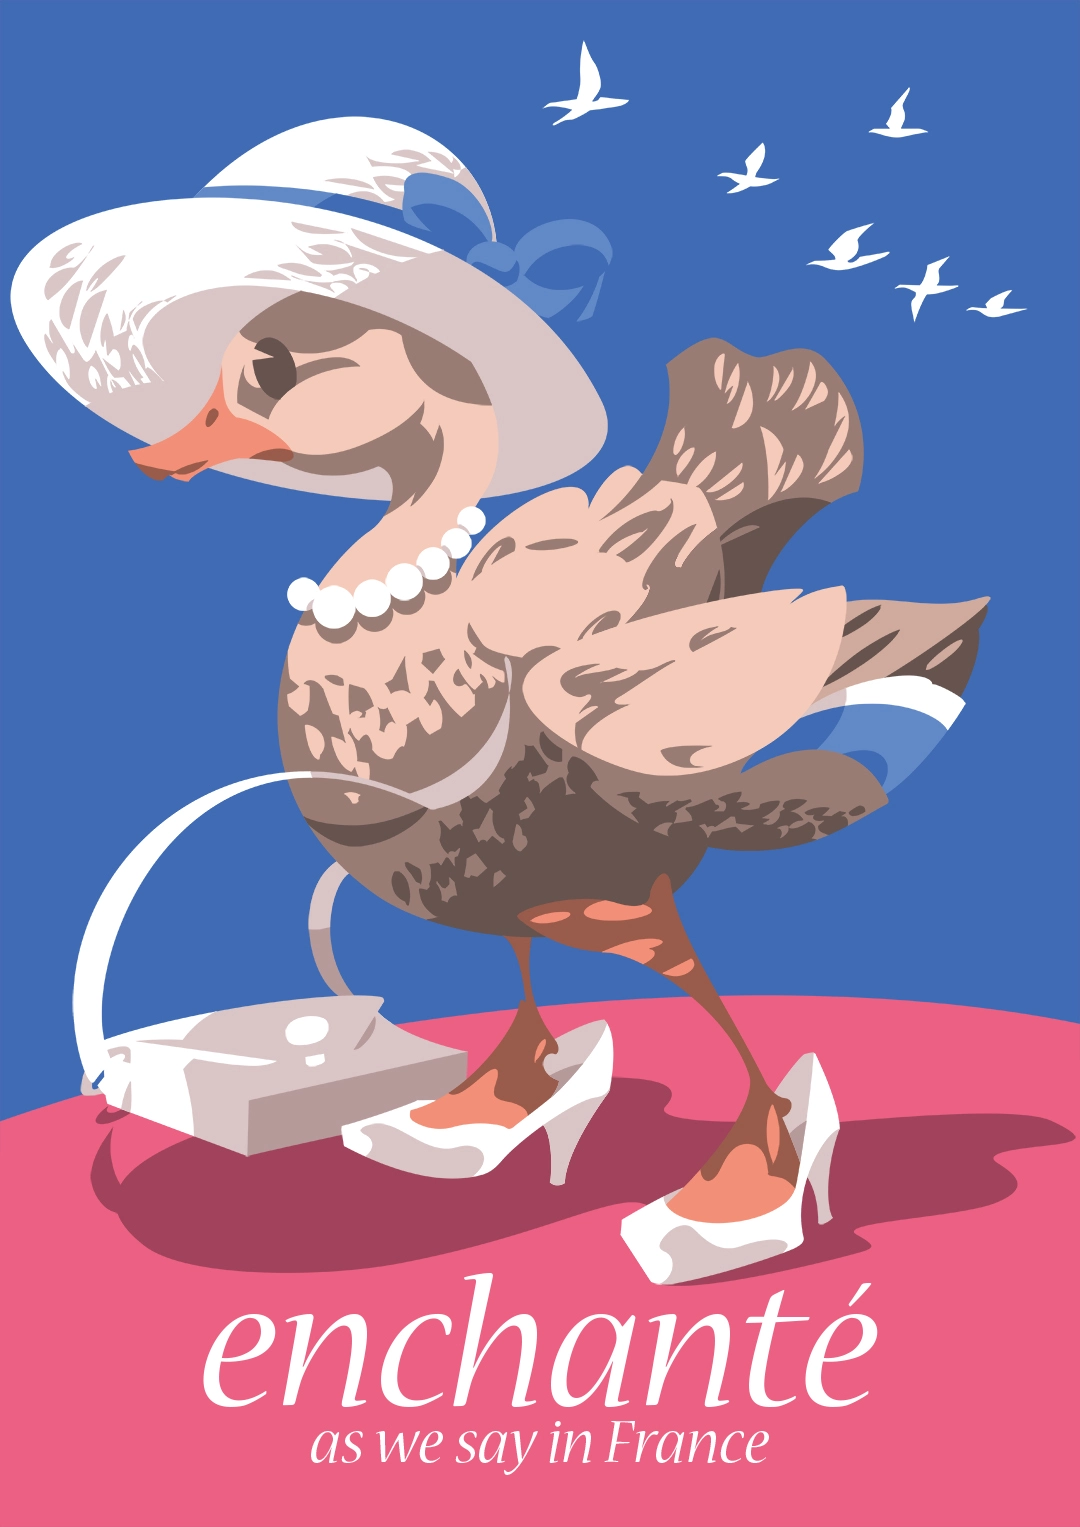 A mallard stands poised in high heels and accessories.